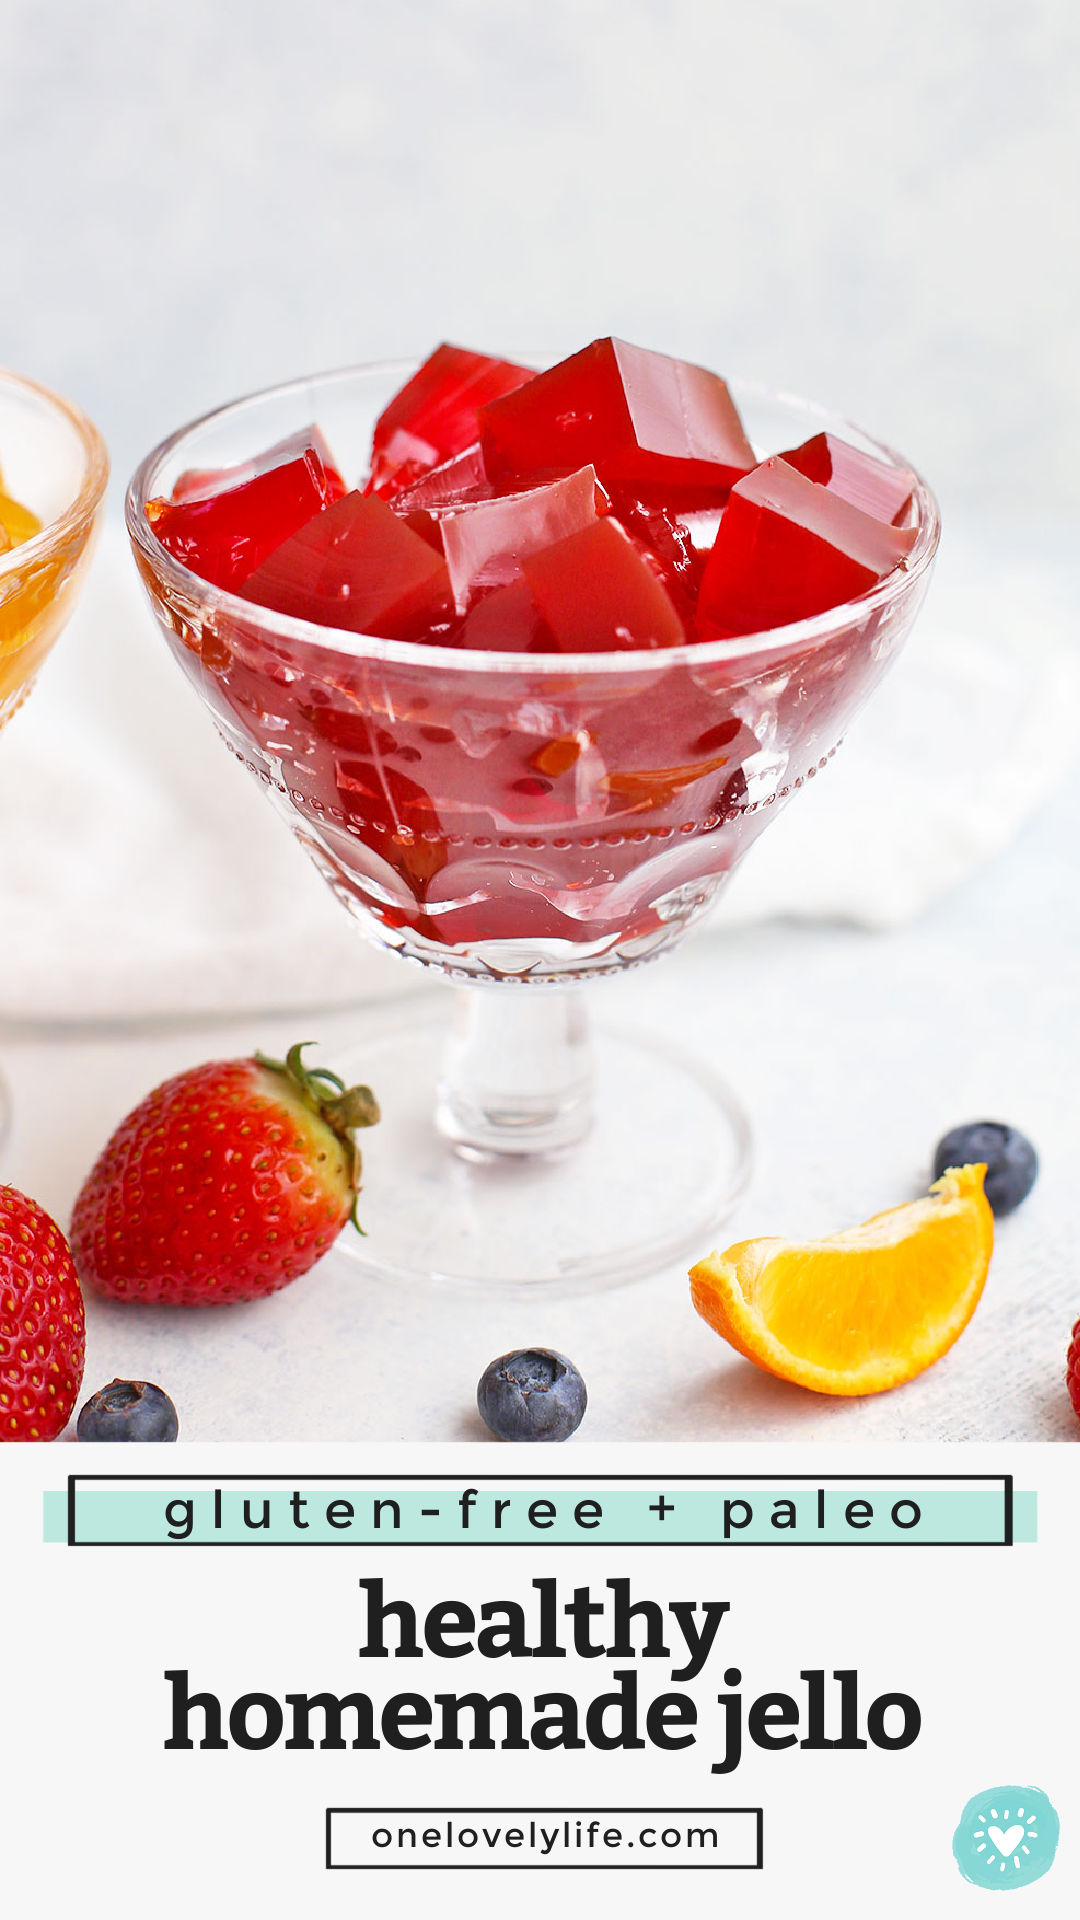 How to Make Healthy Homemade Jello - Yes, really! This homemade gelatin recipe is made from natural ingredients, and natural sweeteners, without any dye or additives. (Dairy free, gluten free & paleo approved!) // paleo jello // homemade jello recipe // homemade gelatin recipe // healthy gelatin #jello #gelatin #healthysnack #healthytreat